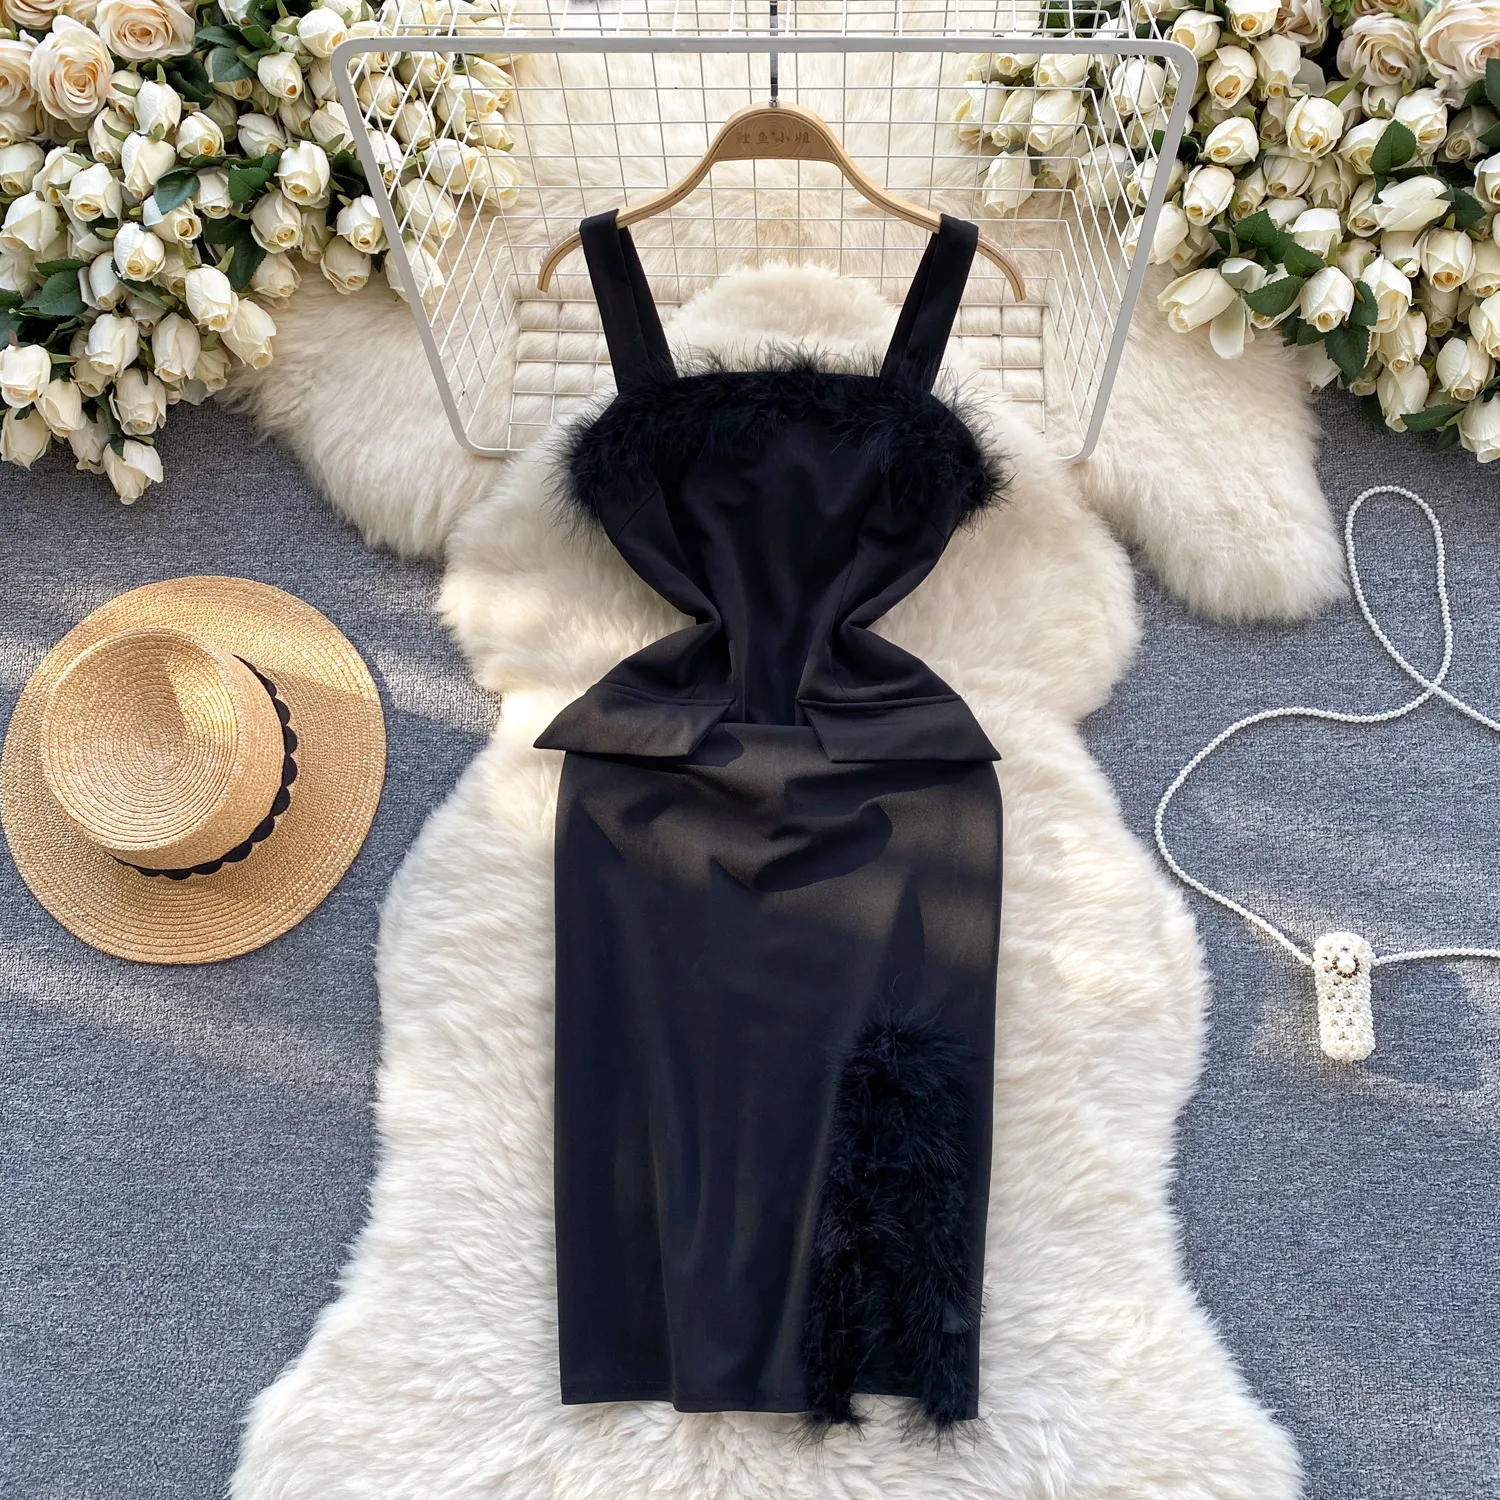 Light mature style women's clothing, high-end dress for socialites, and skirt design with a plush top, slim fit, and medium length suspender dress